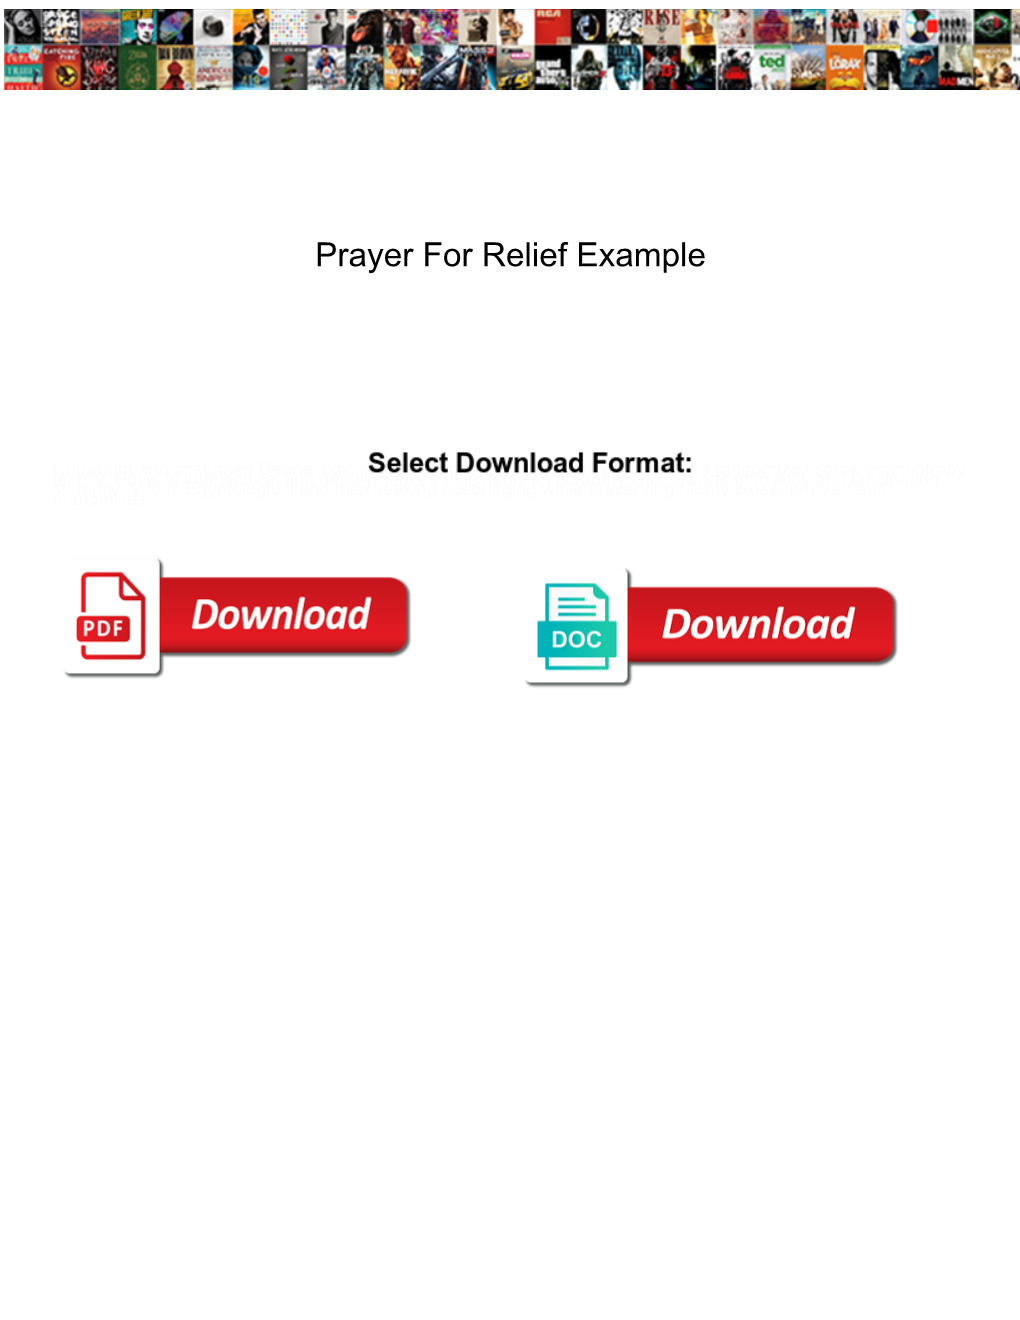 Prayer for Relief Example